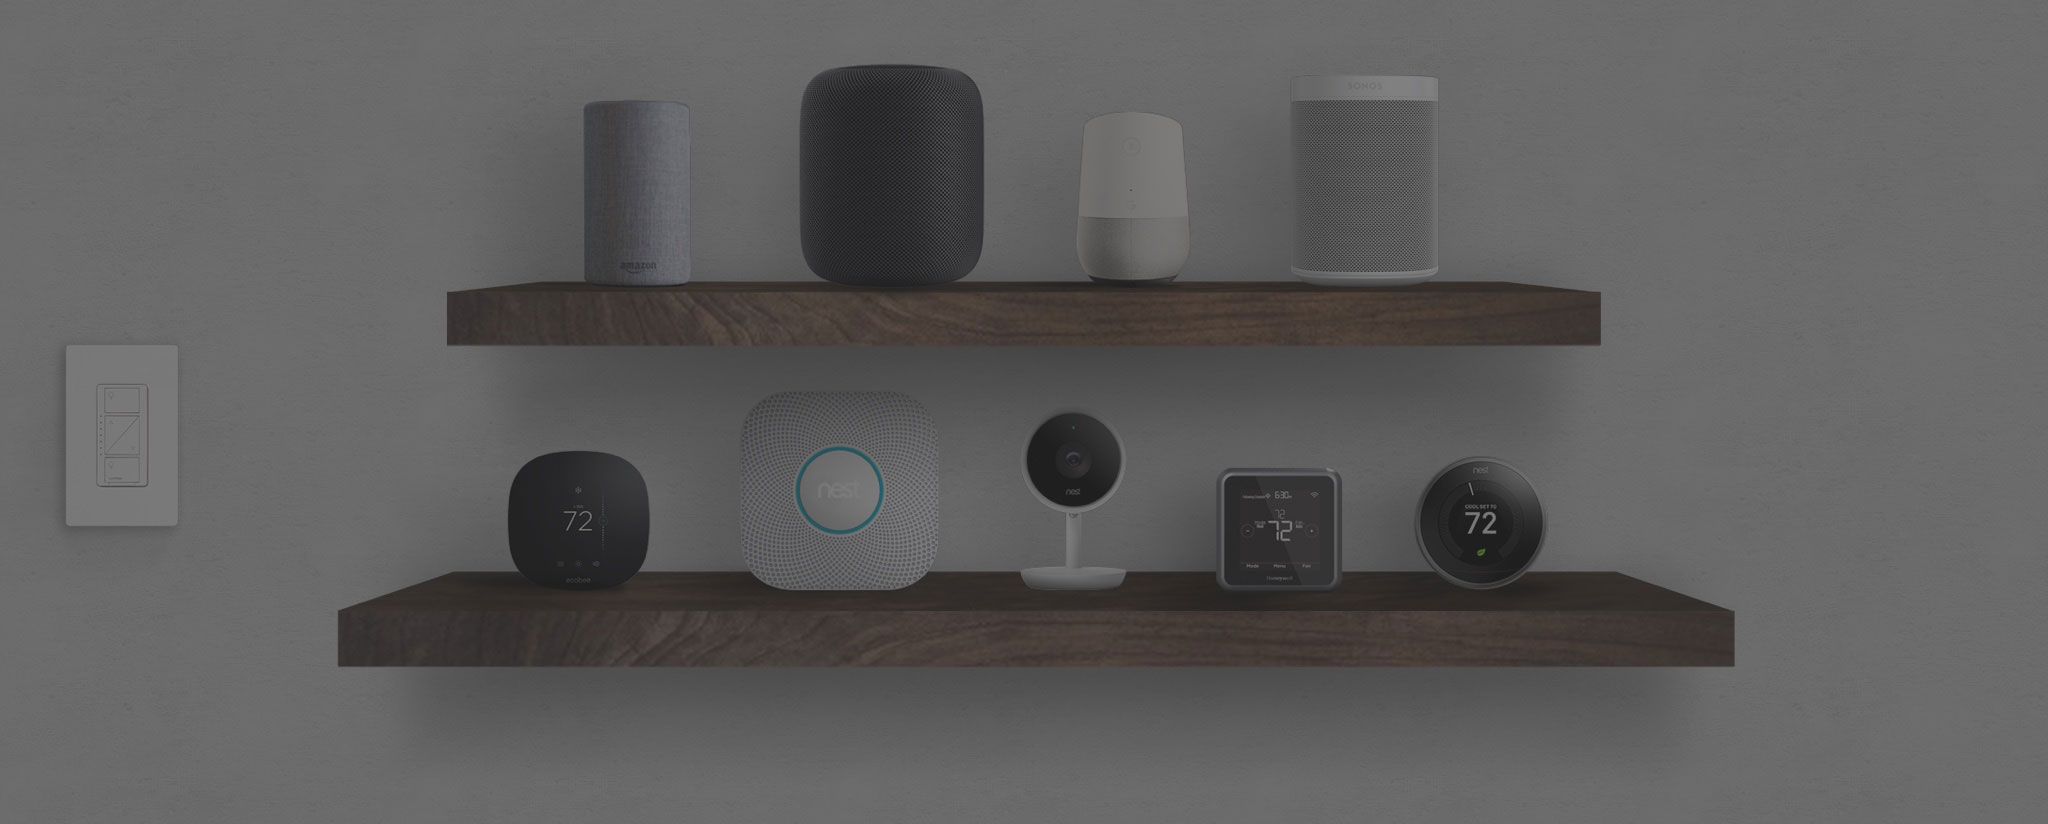 Smart devices on mounted shelf